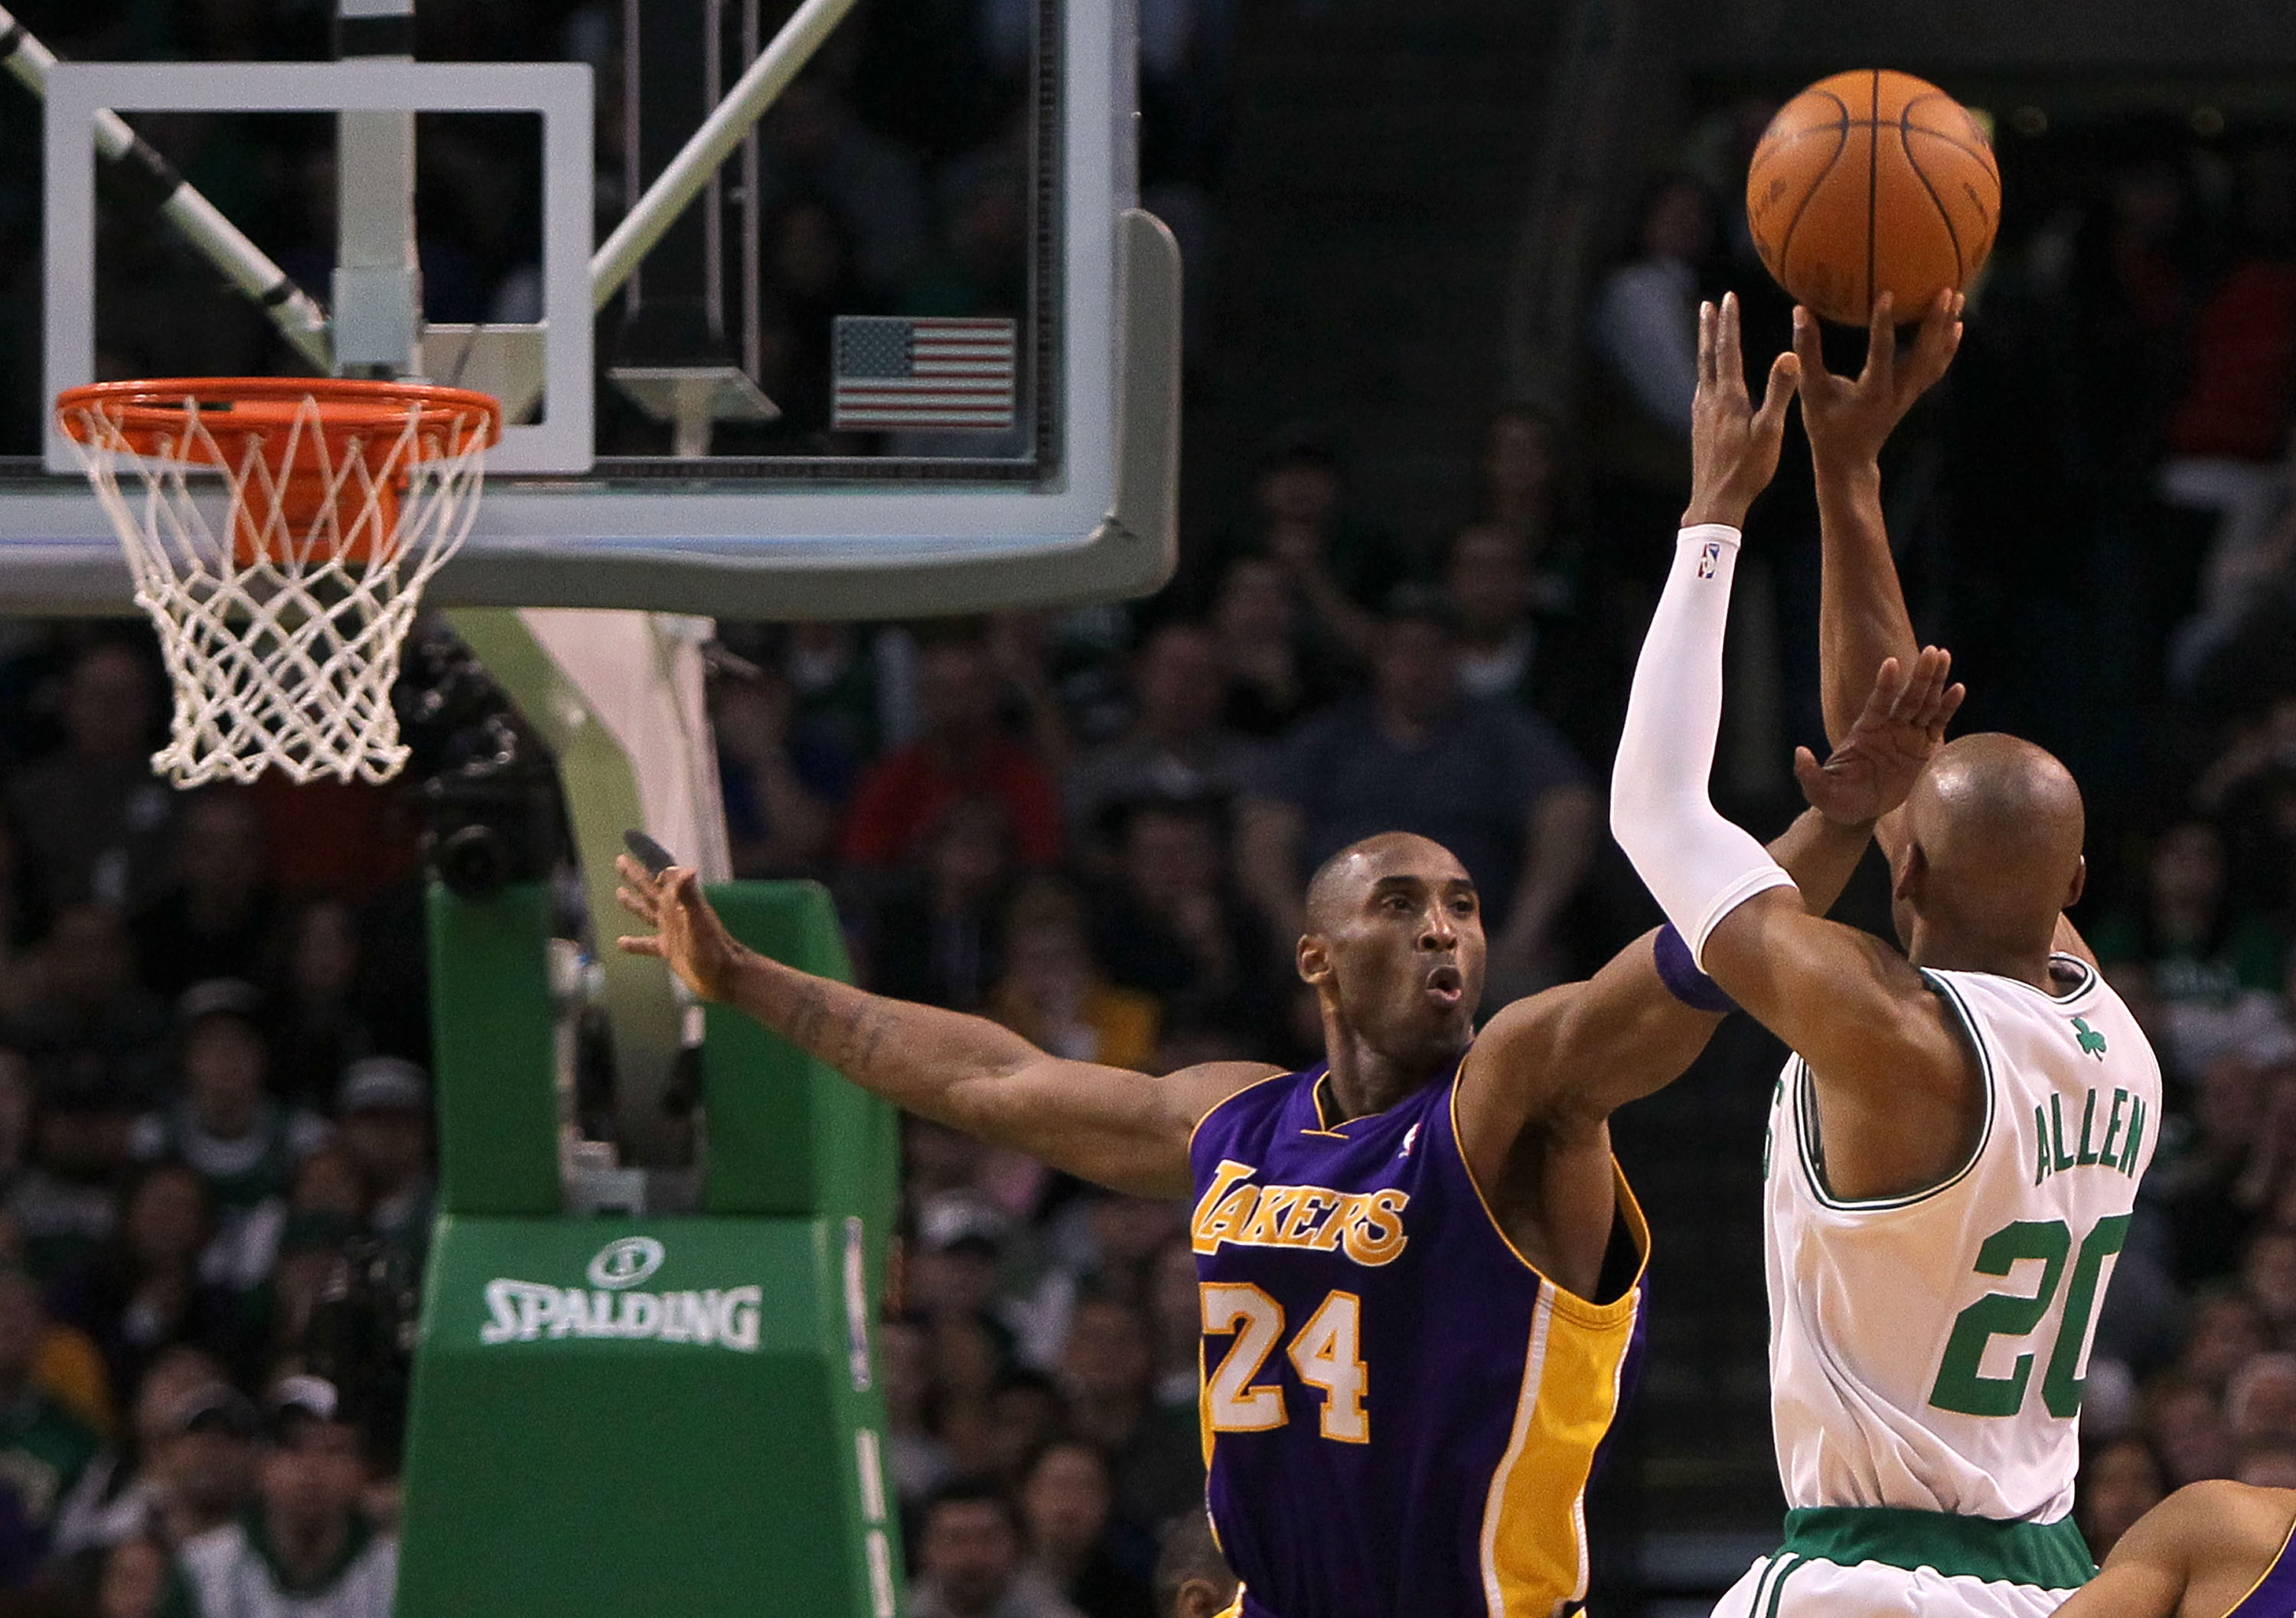 BOSTON - JANUARY 31:  Kobe Bryant  #24 the Los Angeles Lakers attempts to block a shot  by Ray Allen #24 of the Boston Celtics at the TD Garden on January 31, 2010 in Boston, Massachusetts.  The Lakers won 90-89. NOTE TO USER: User expressly acknowledges